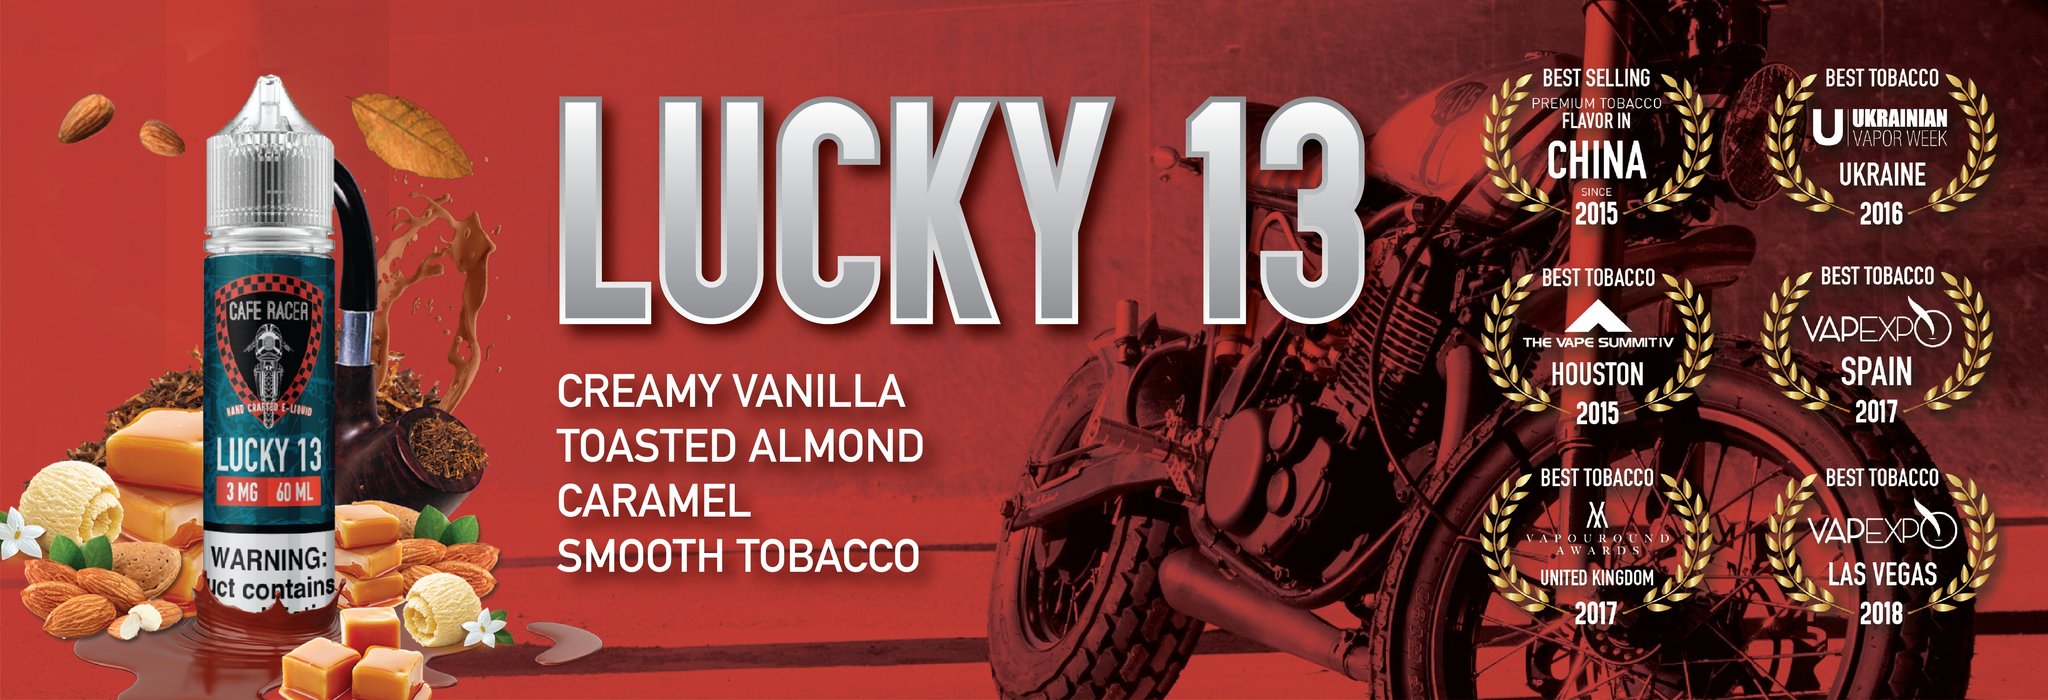 Lucky 13 by Cafe Racer Vape | High Quality and Best Value E-juice